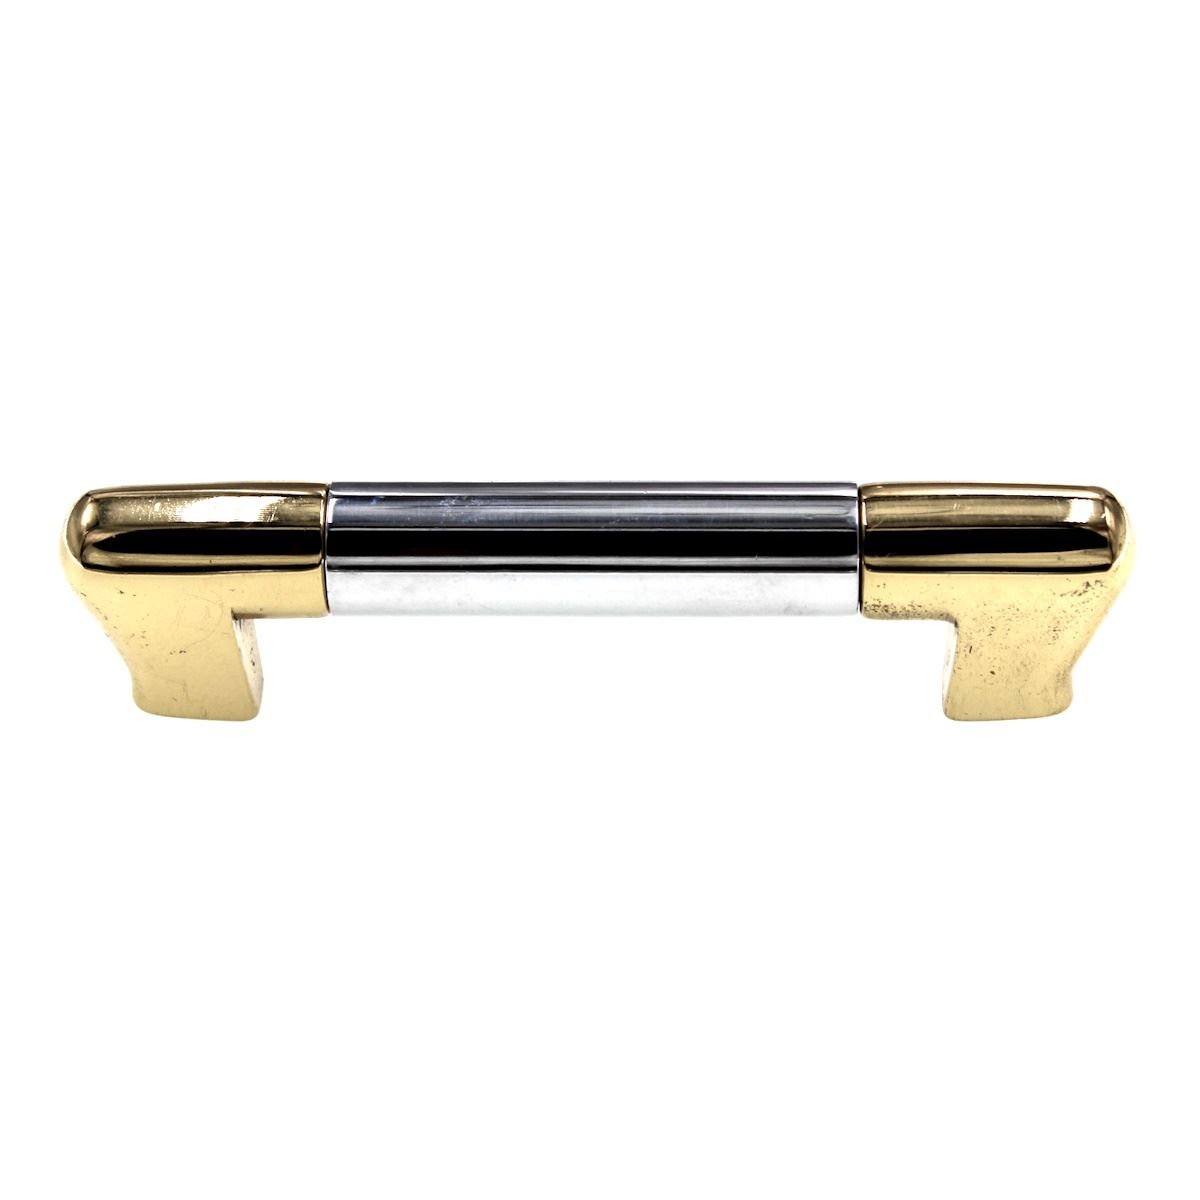 Period Brass Cabinet Pull 3 Ctr Two-Tone Polished Chrome Solid Brass